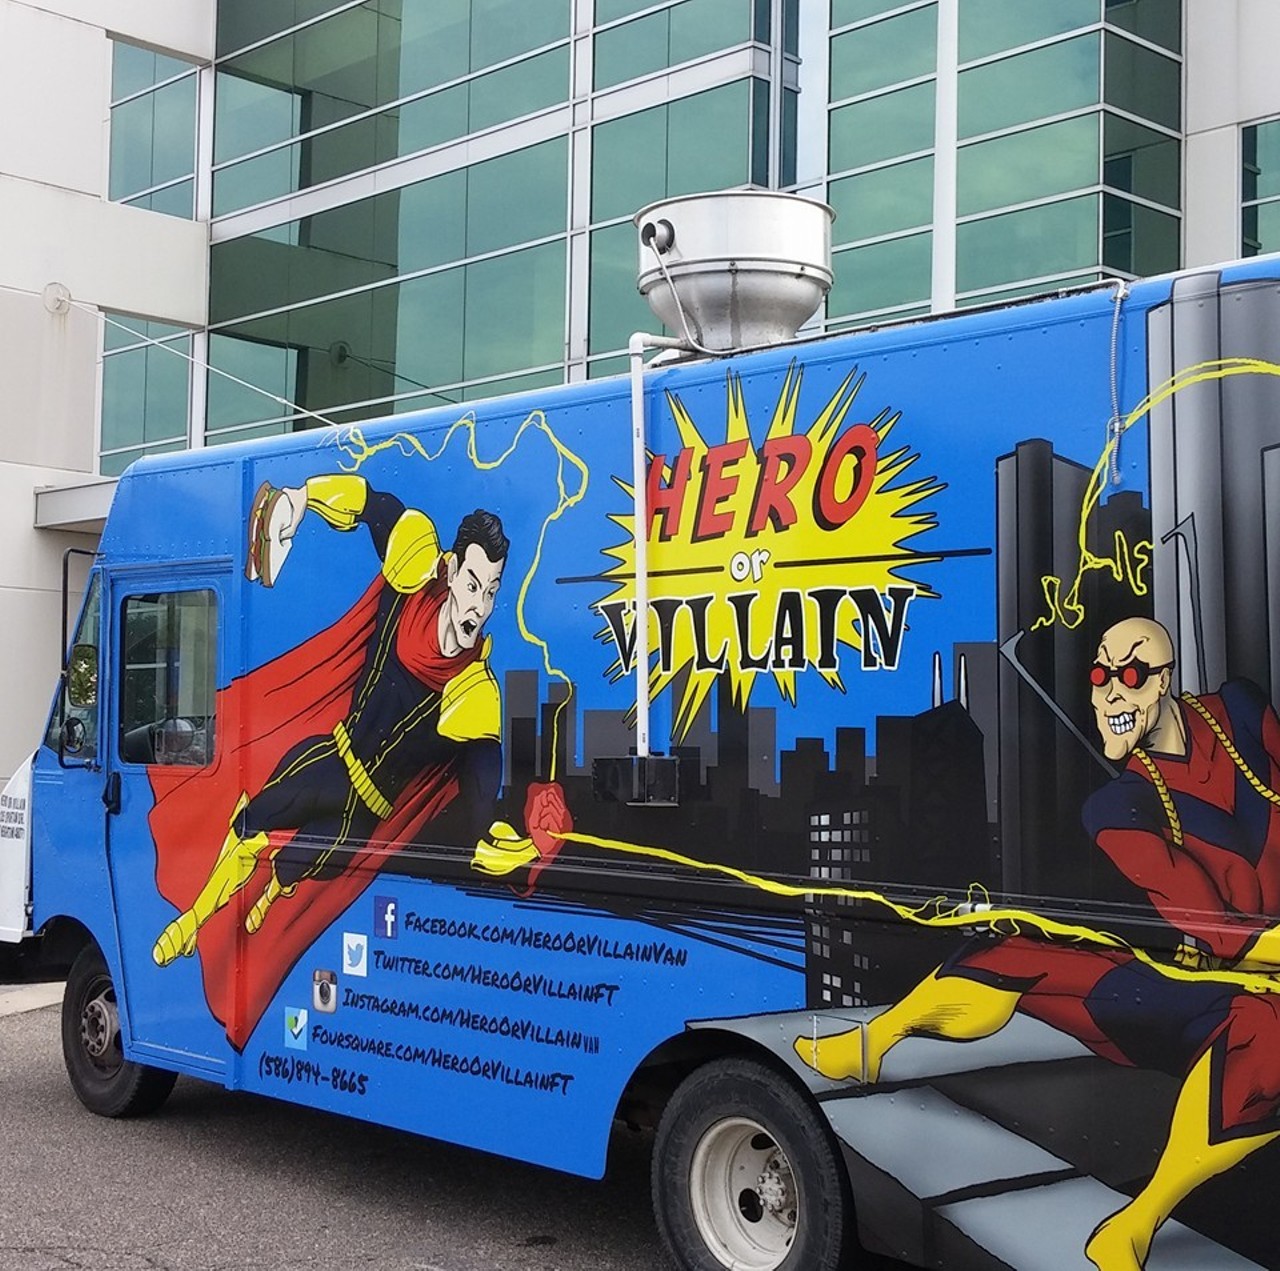 Hero or Villain
Hero or Villain is Detroit's deli sandwich food truck with an inclusive menu offering meat, vegan, vegetarian and gluten free options. Plus, it's just really fun that it was a superhero theme. &nbsp;
Photo via Facebook.